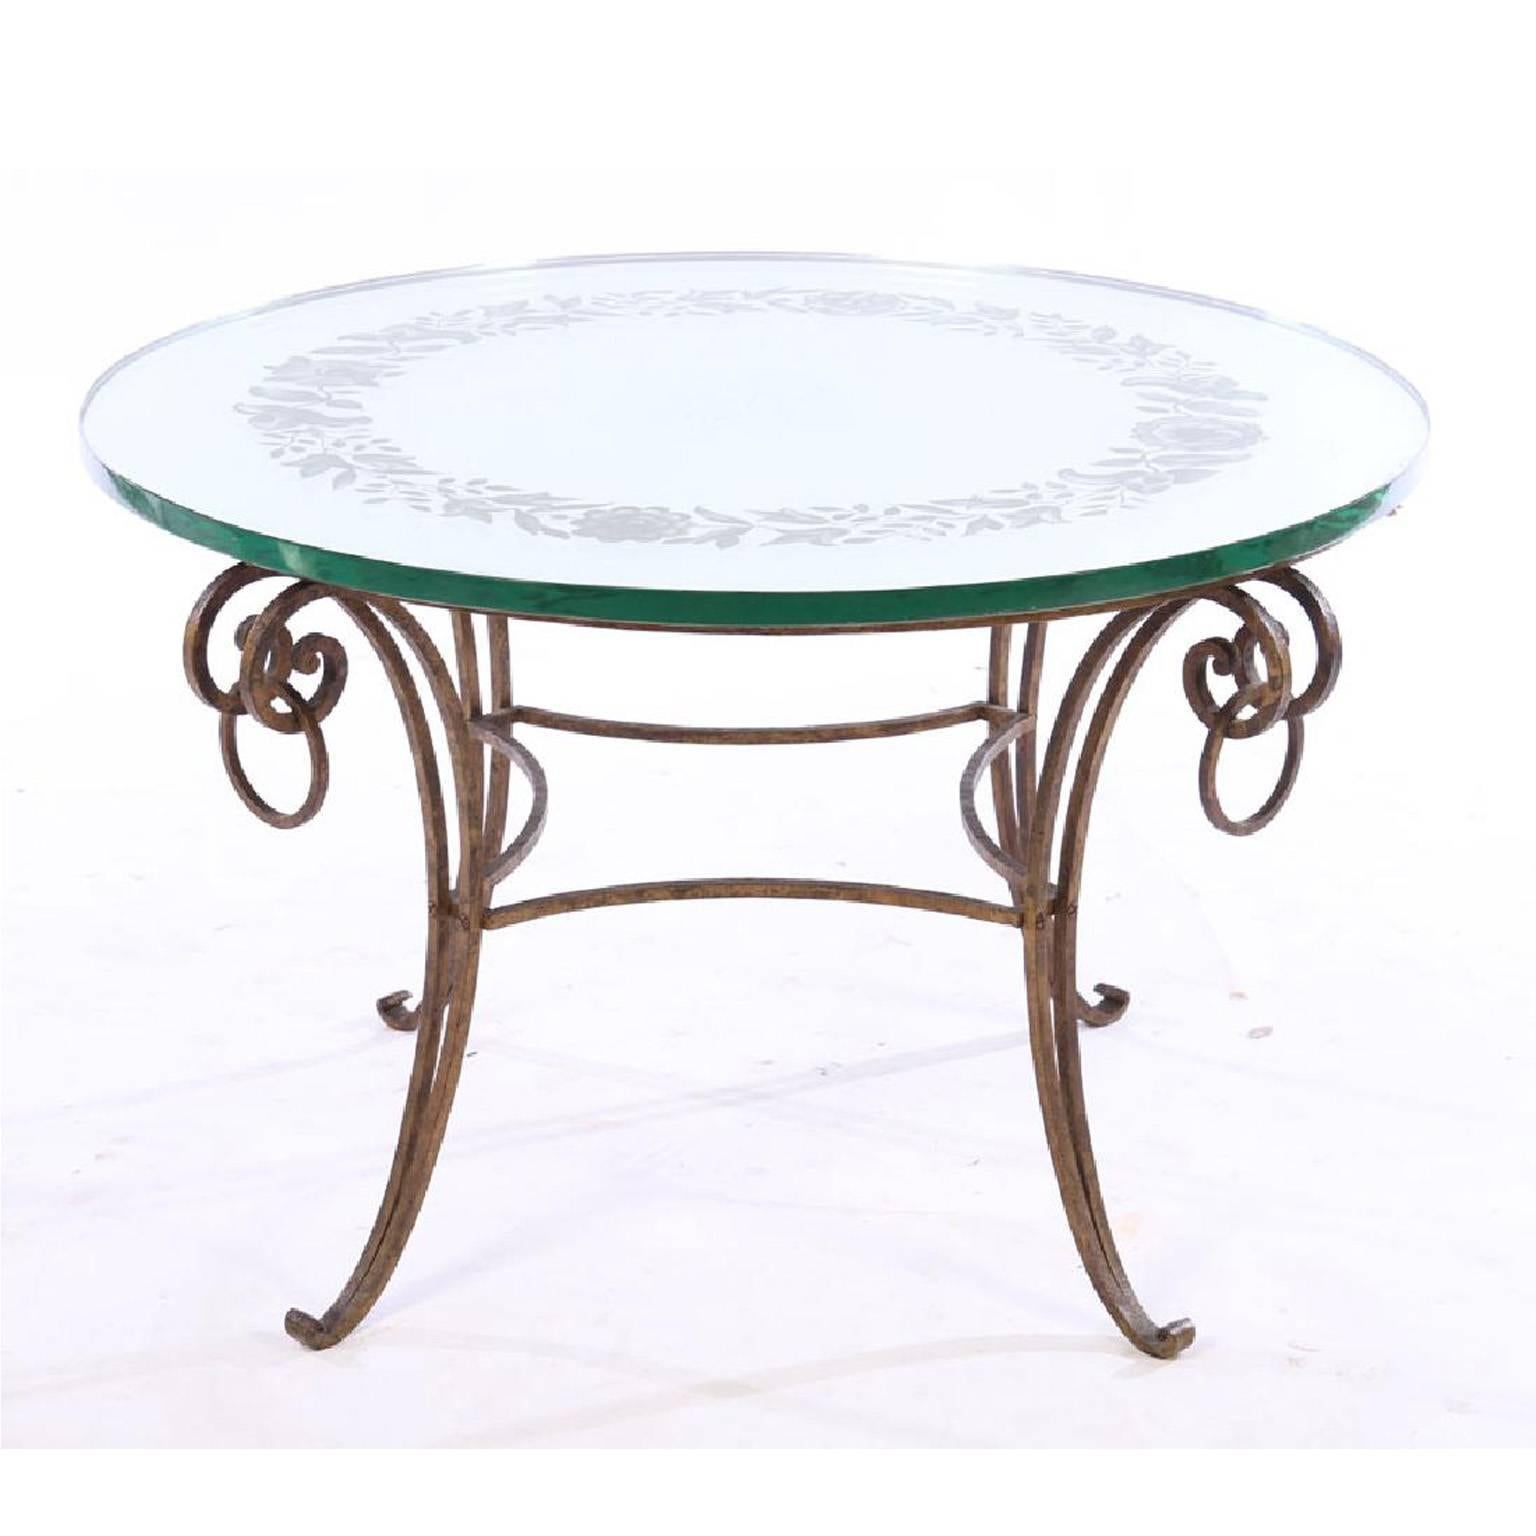 French mirrored coffee table in the style of Rene Drouet having etched floral decoration supported on wrought iron base. Mirrored top is 1 inch thick. Sold as a set with gilt decorated wrought iron and crystal, eight-arm chandelier. Hollywood